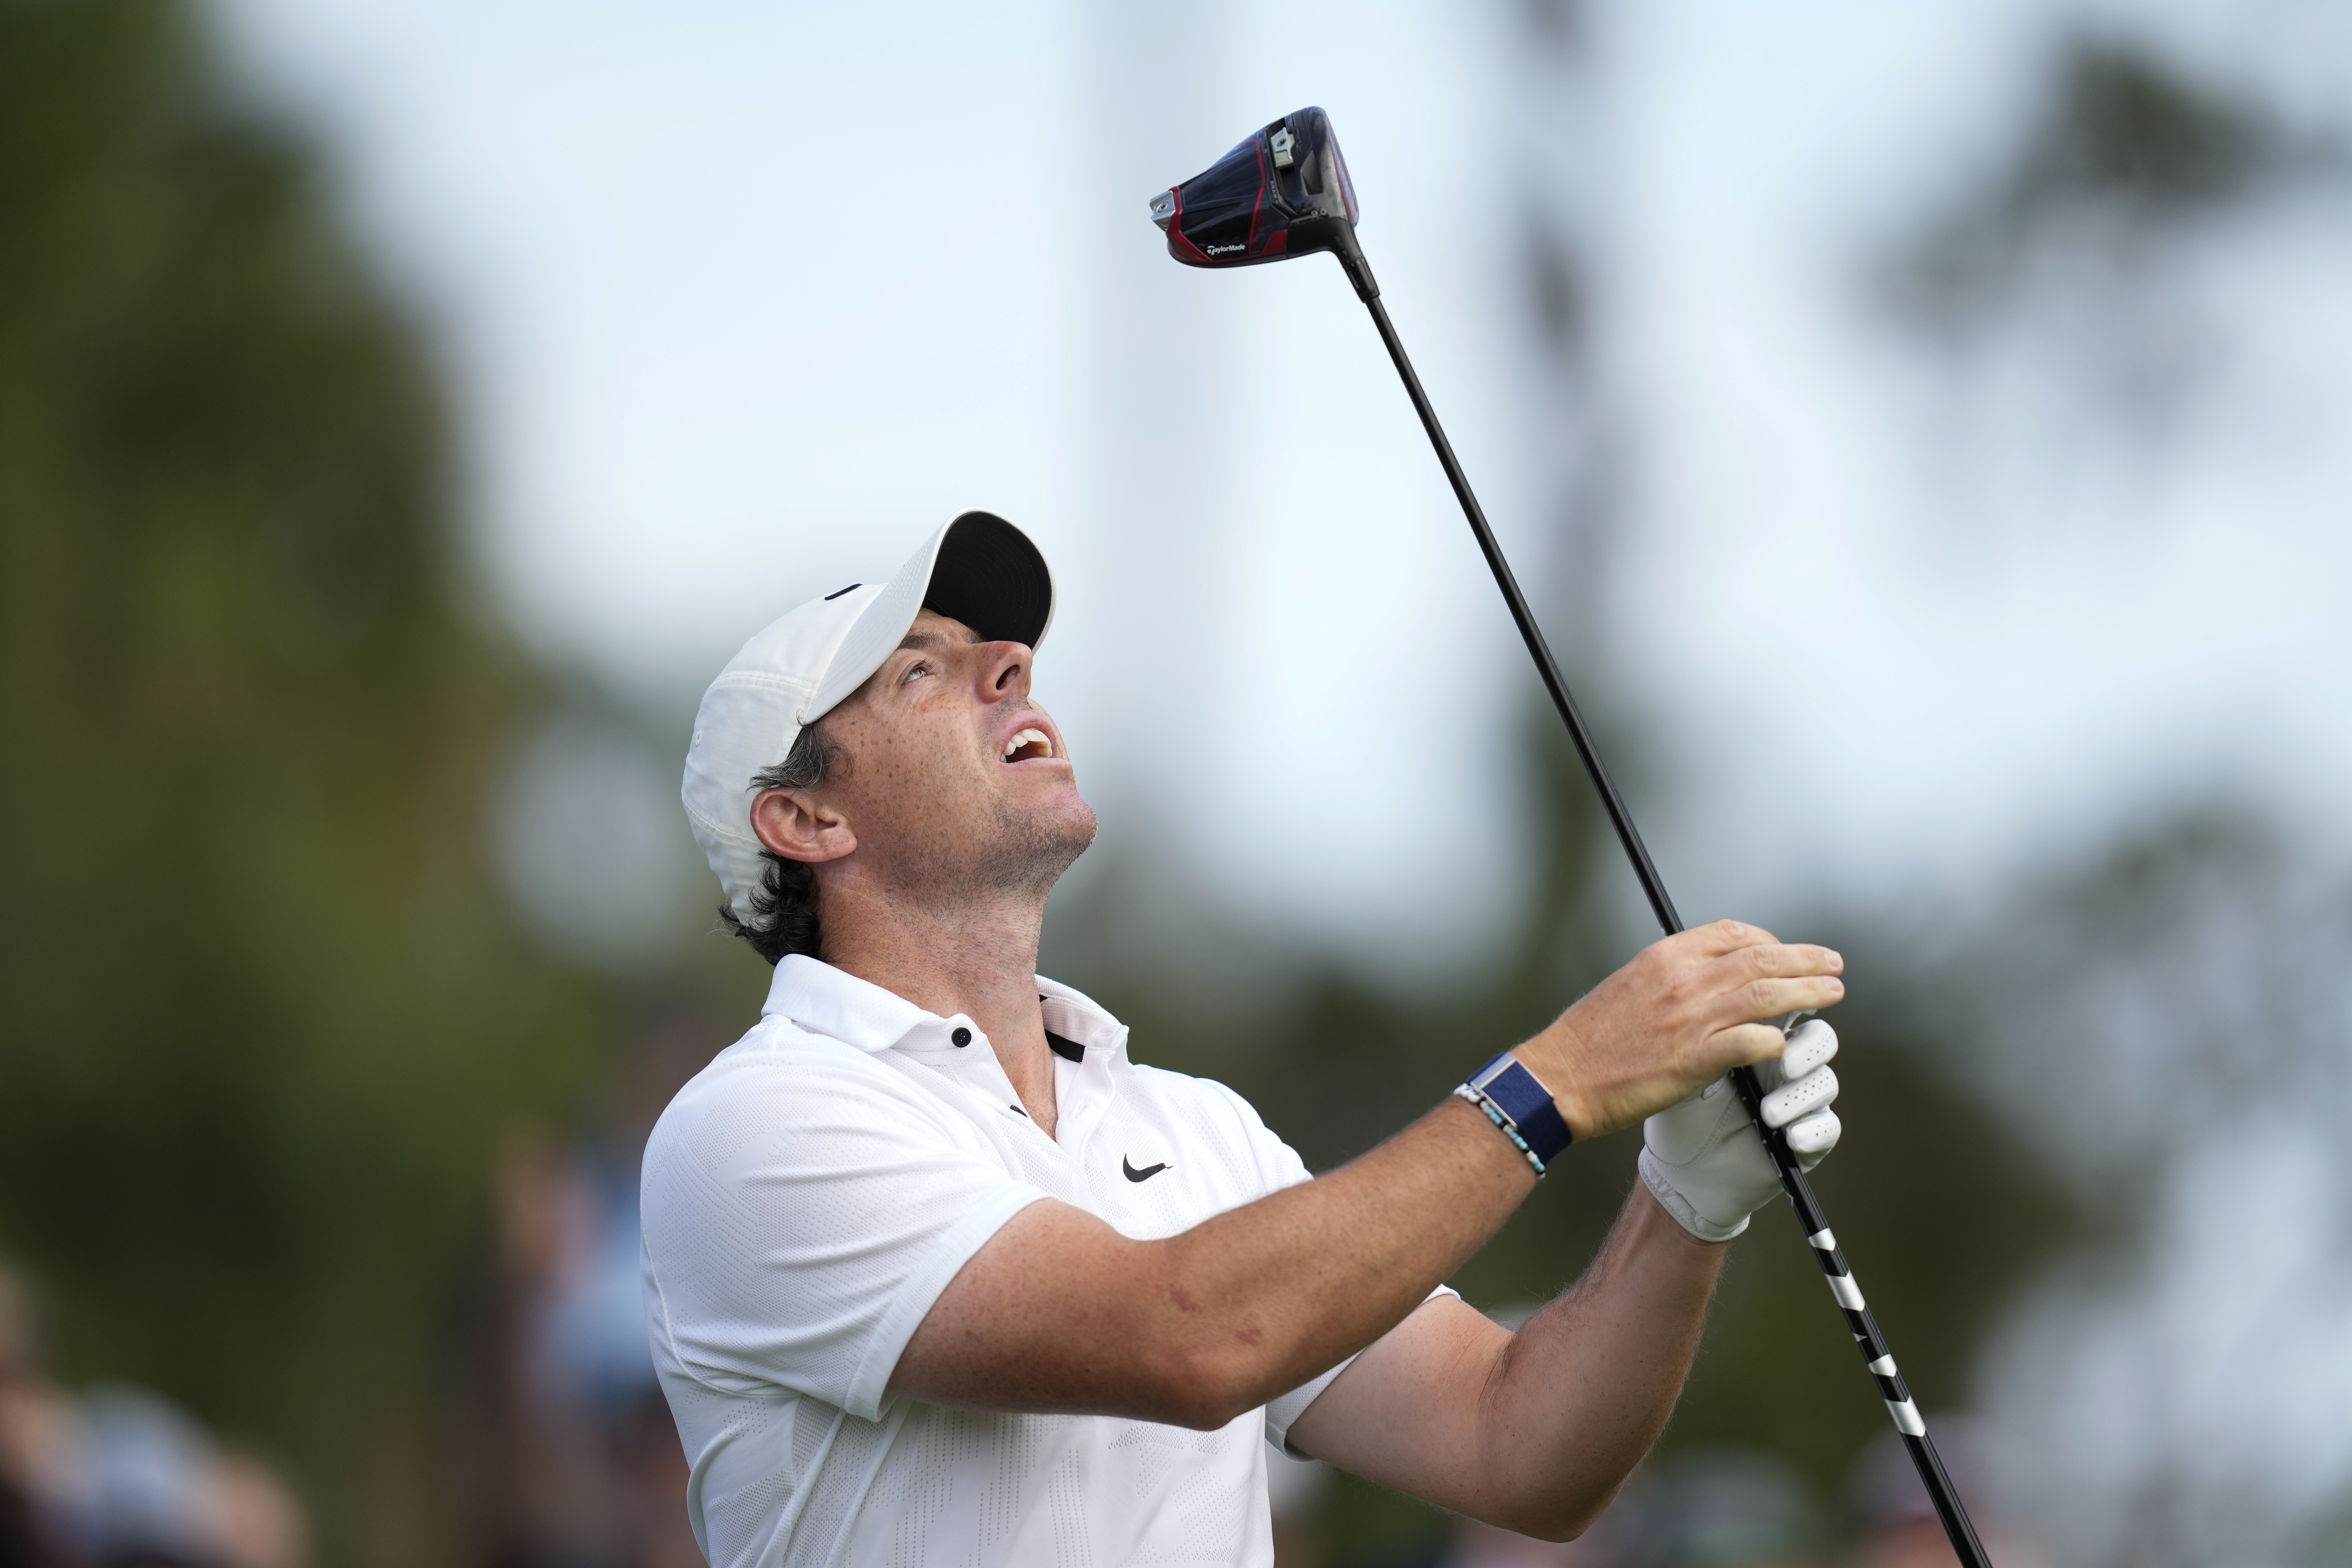 Players Championship - McIlroy misses cut at Sawgrass